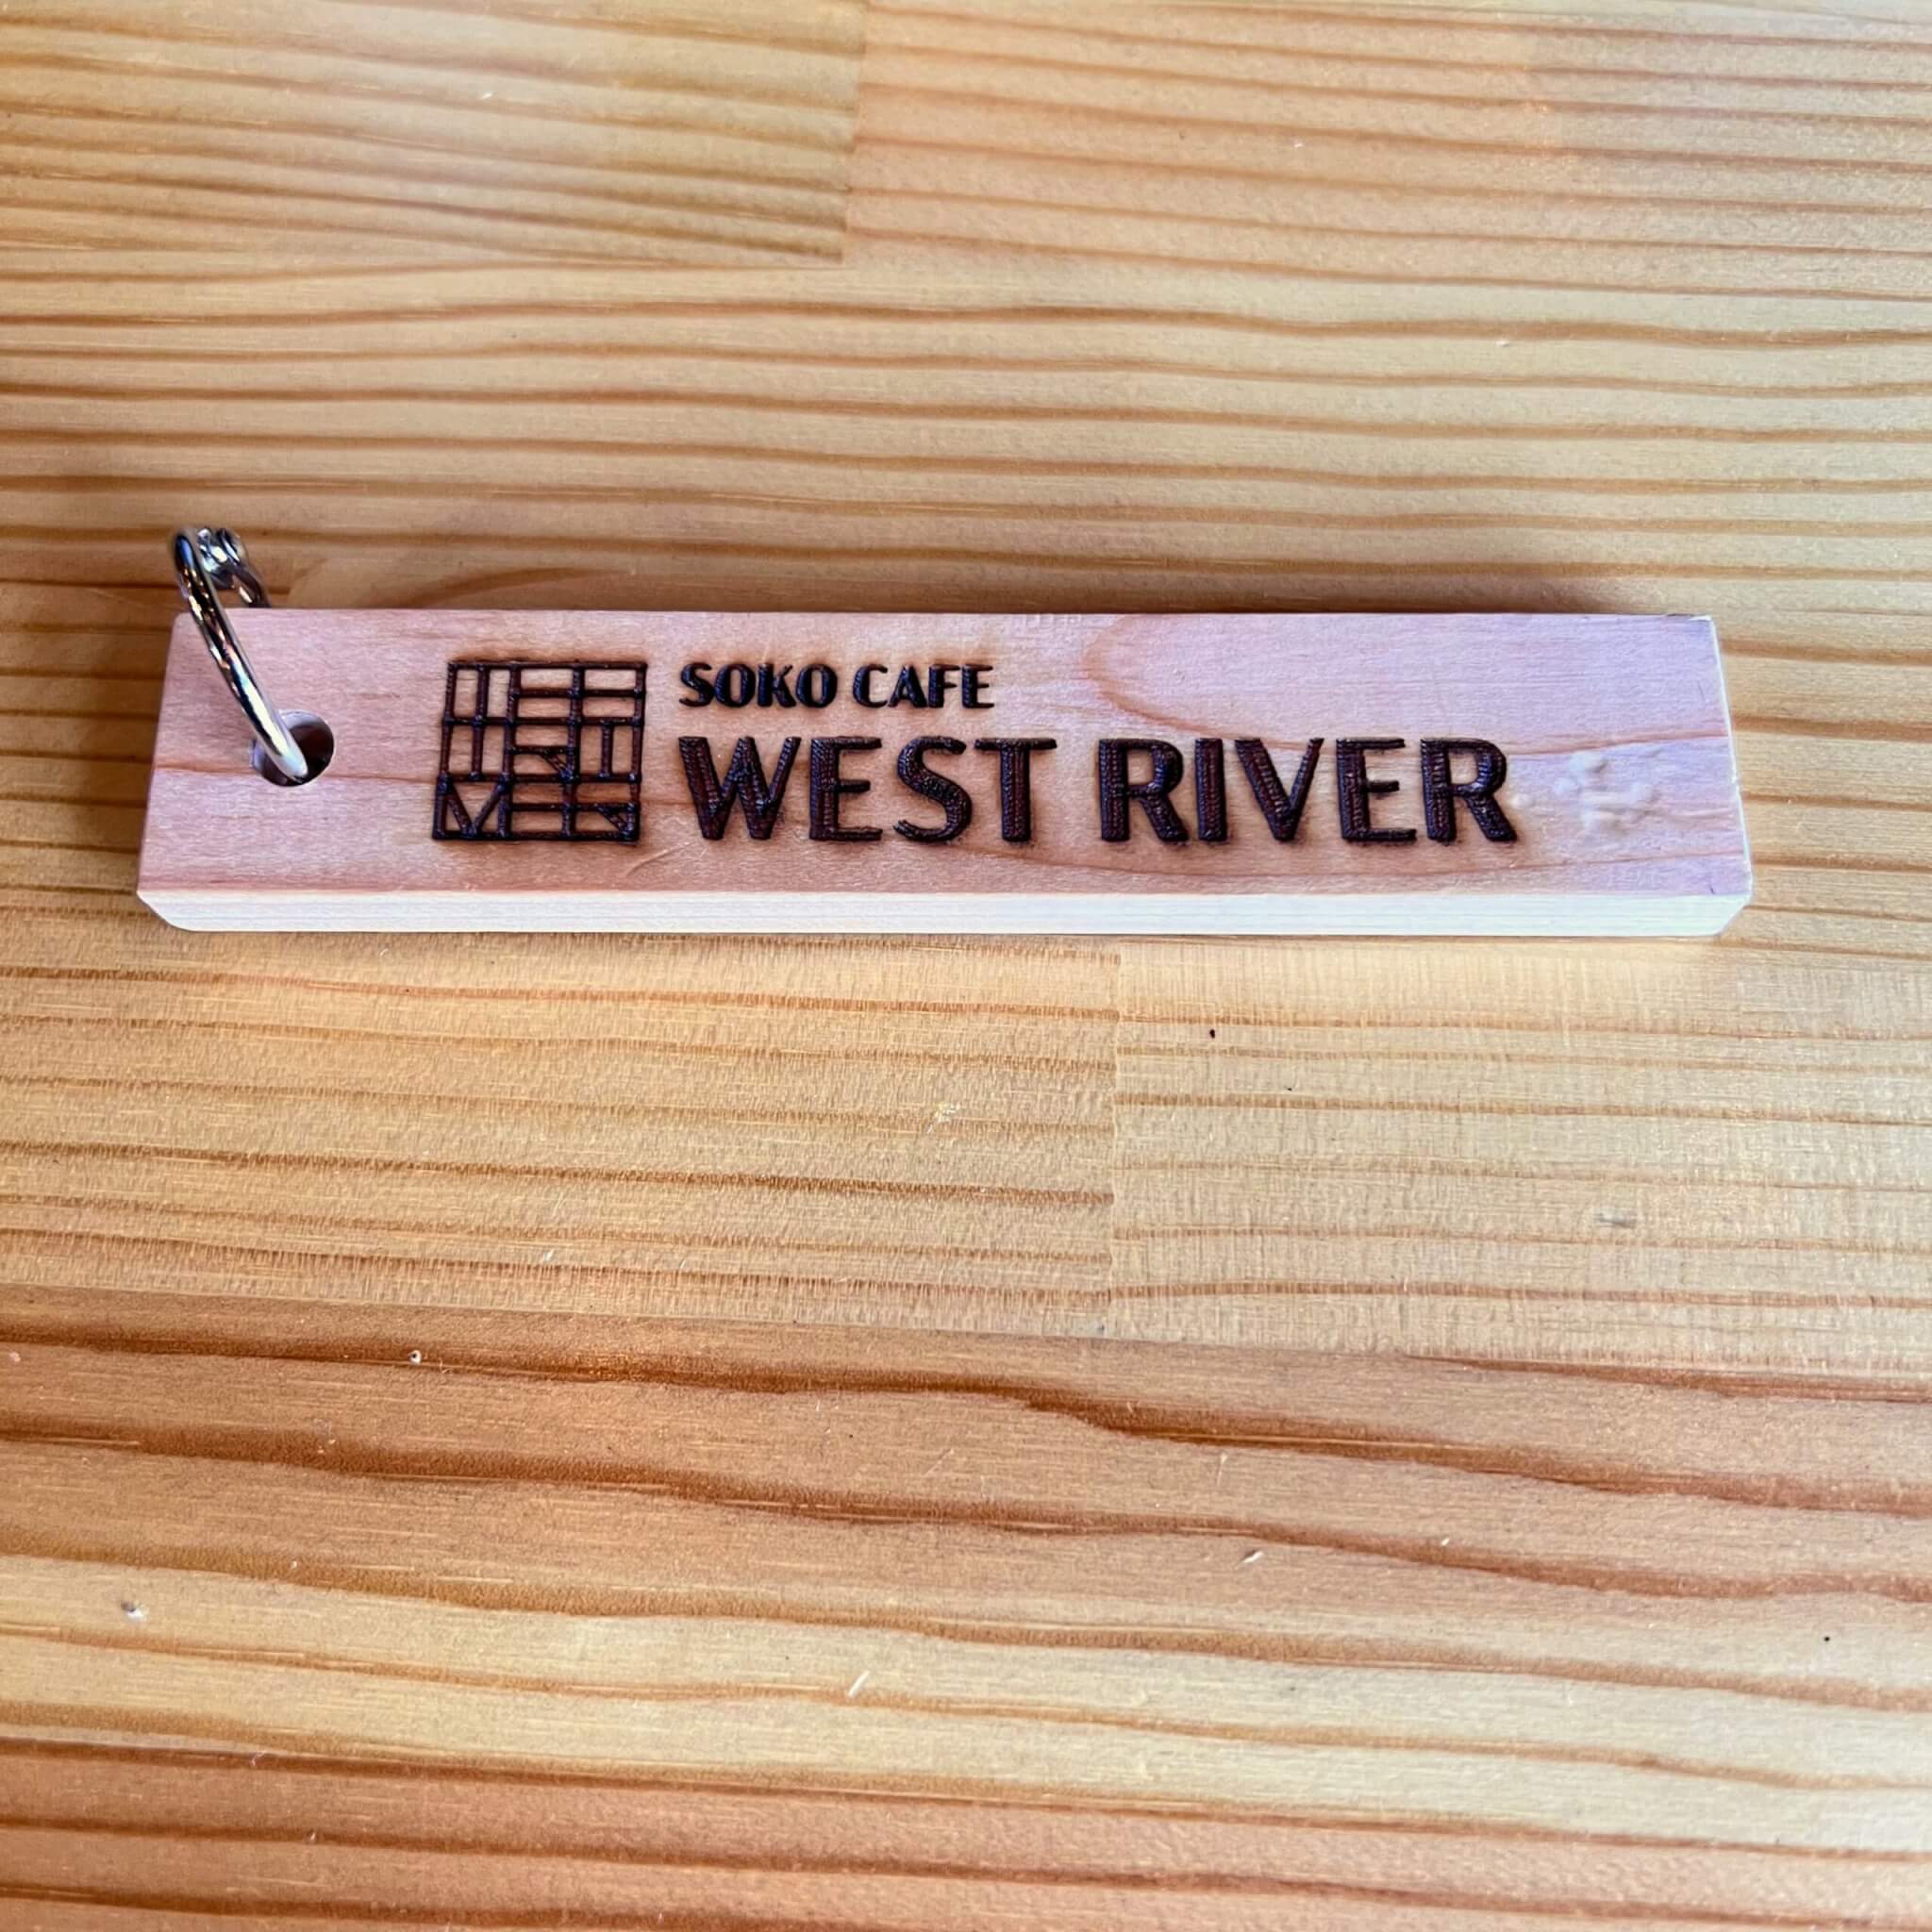 WEST RIVERの木札の店名部分